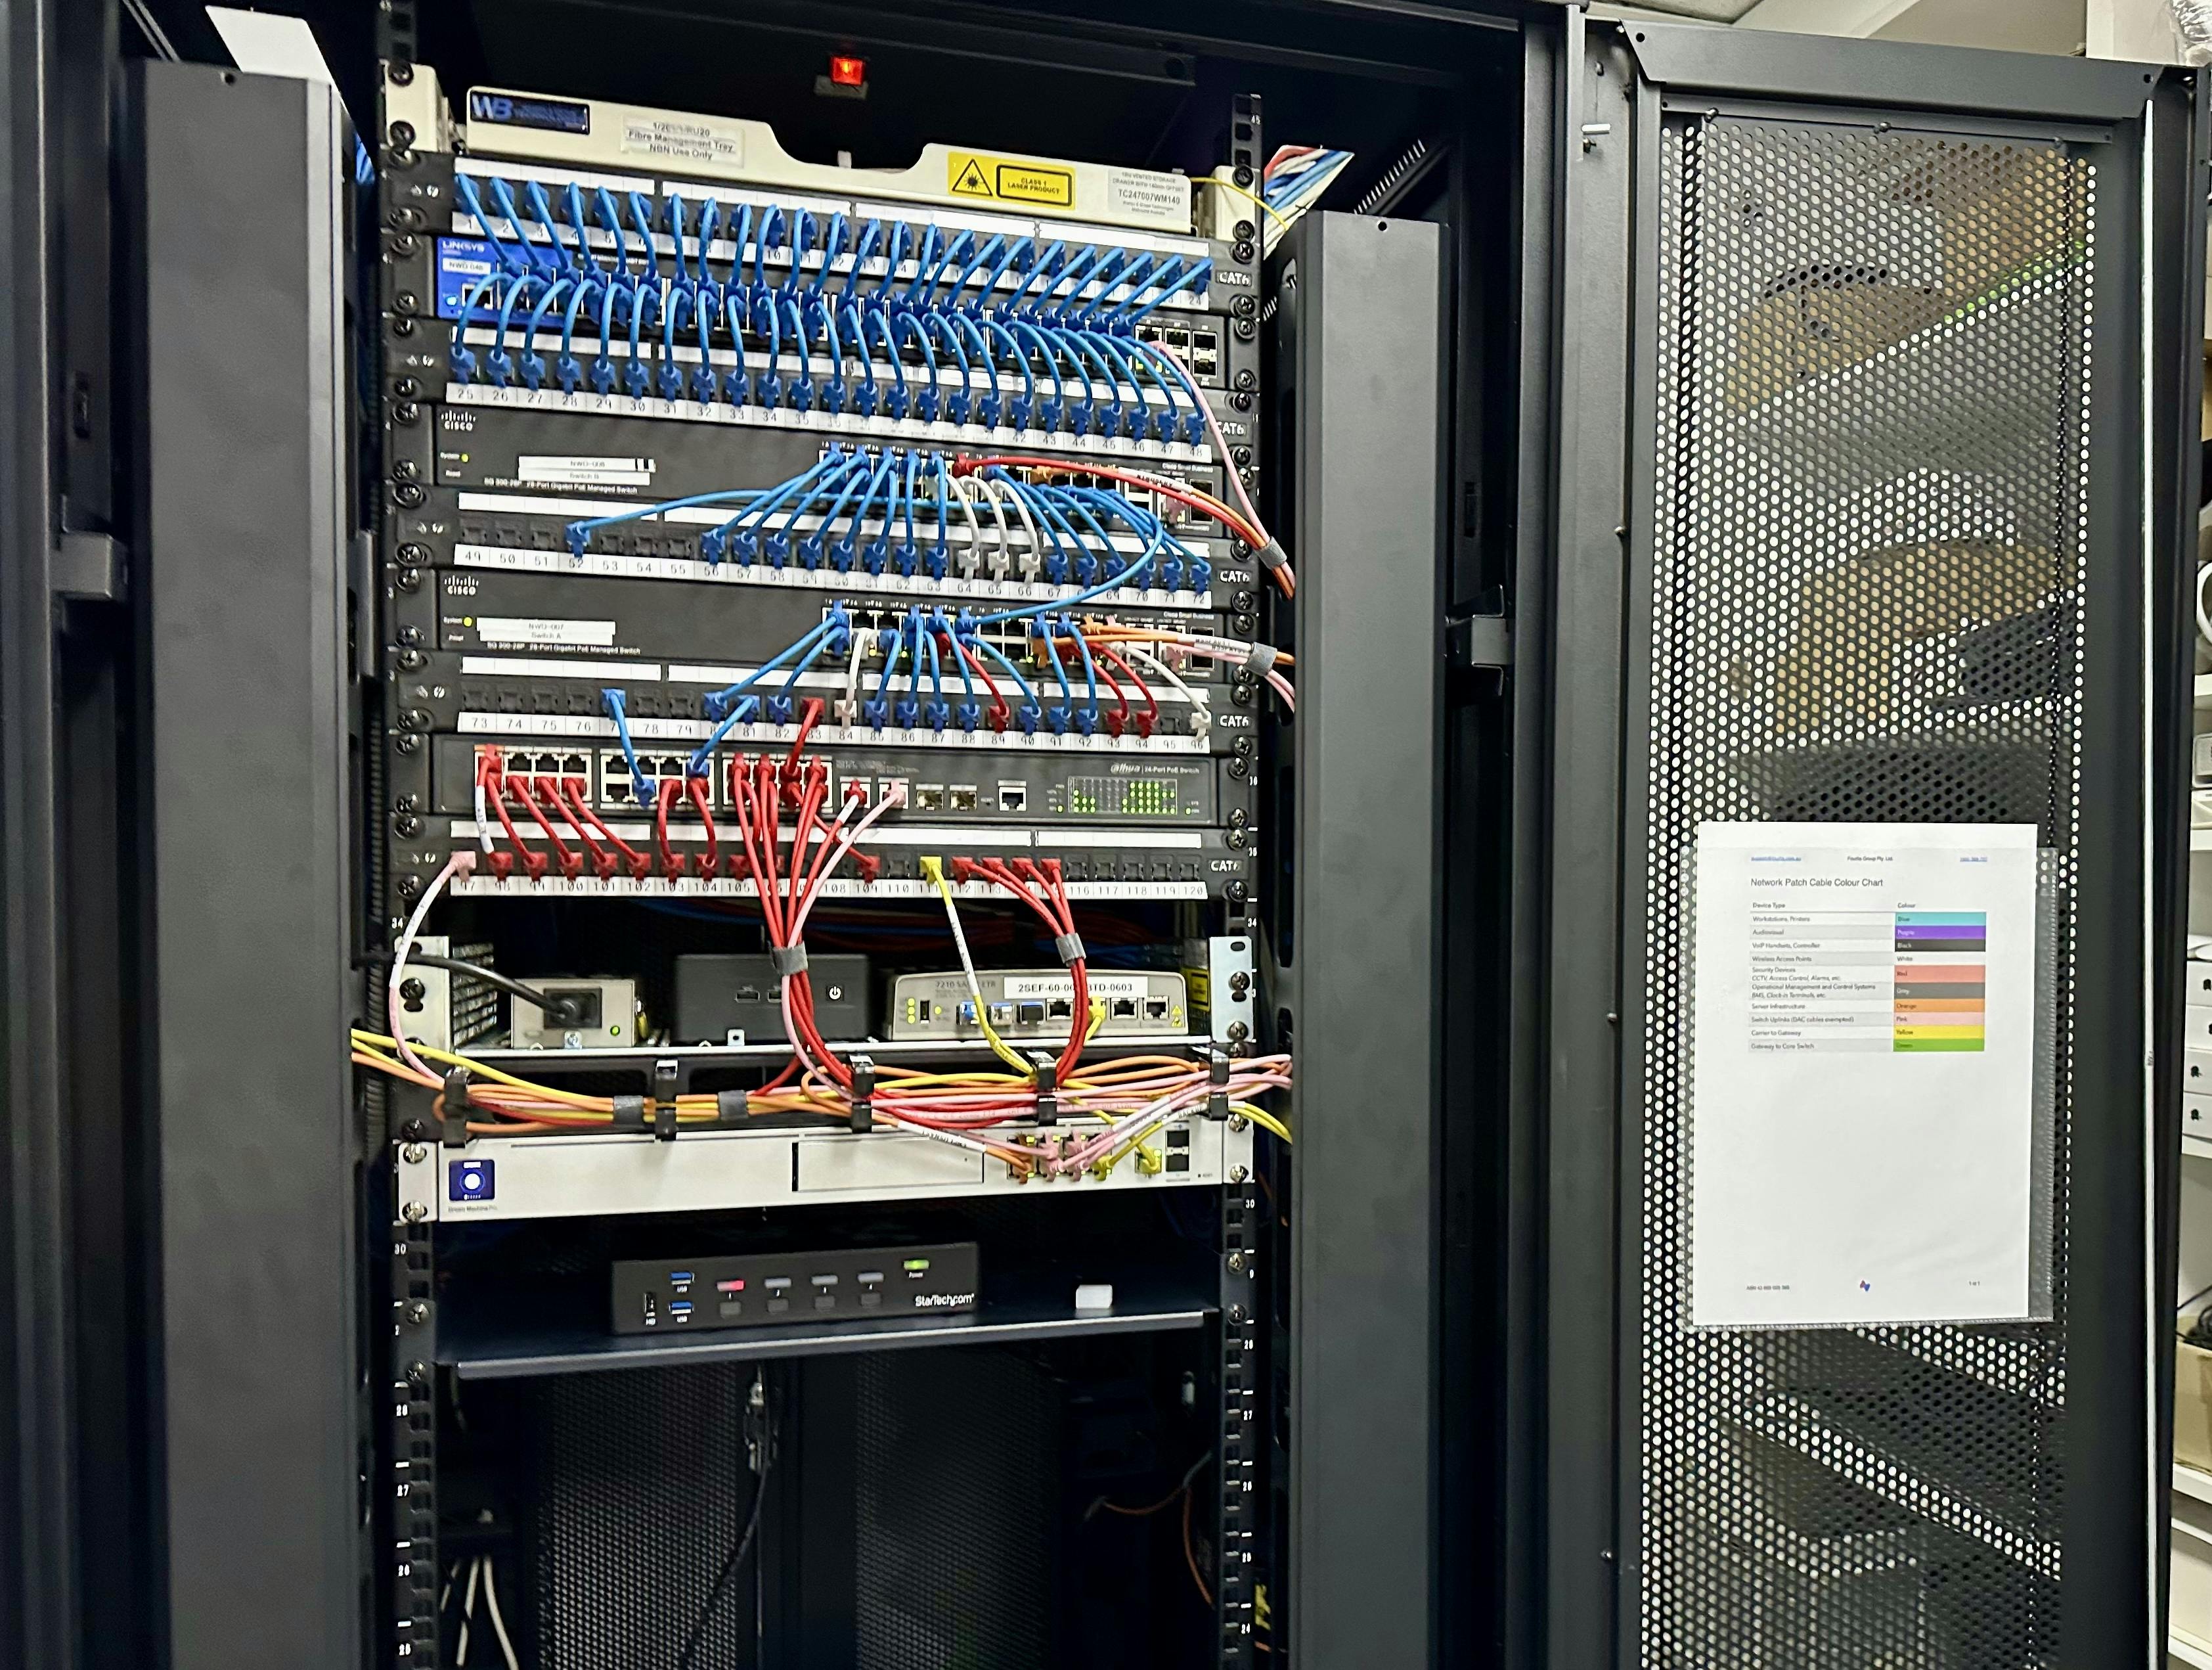 An image related to Rack Installation